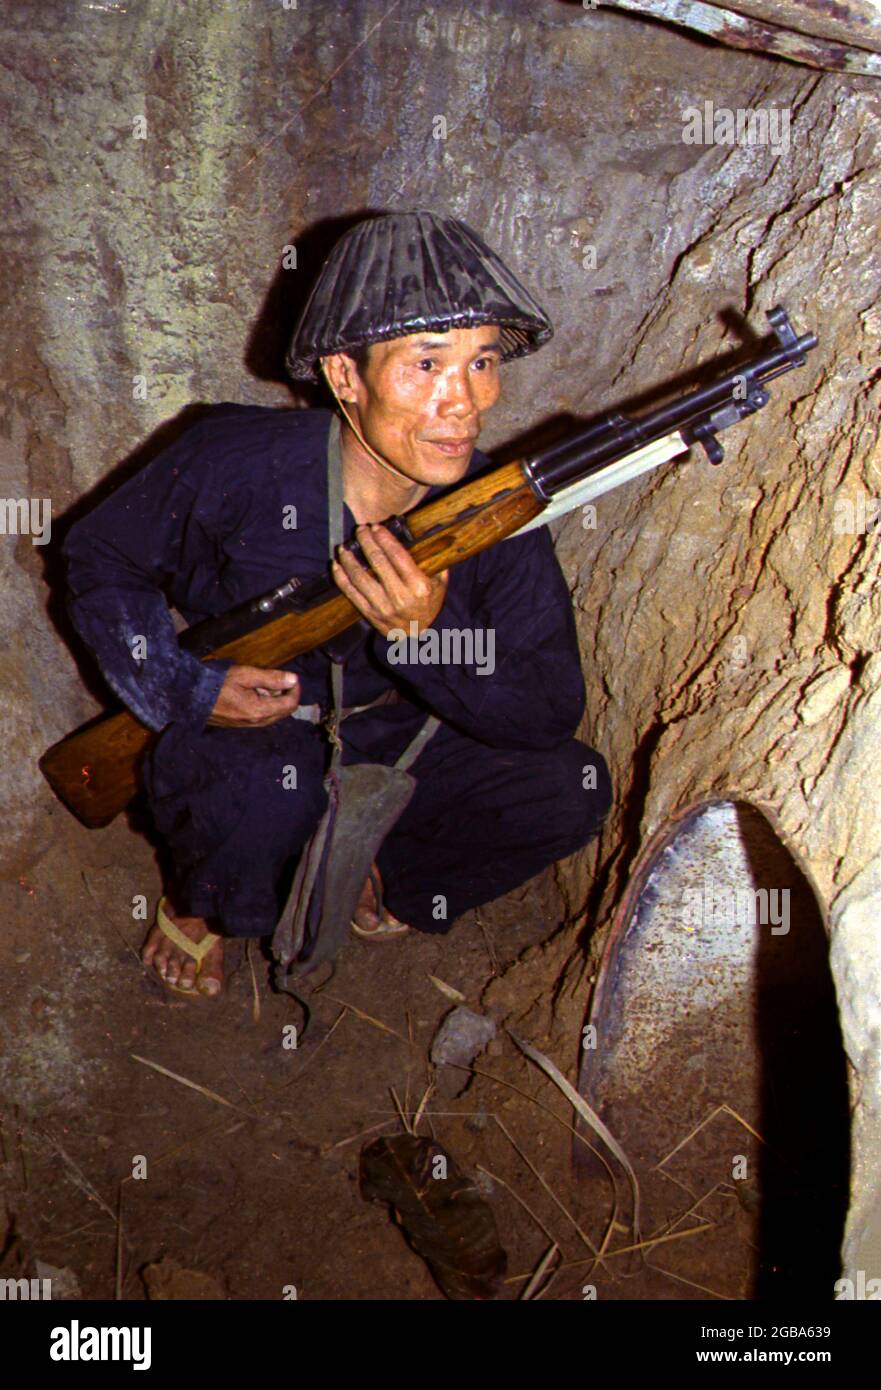 VIETNAM - 1968 - A Viet Cong soldier crouches in a bunker / tunnel system at an unidentified location in Vietnam with a SKS rifle.during the Vietnam W Stock Photo